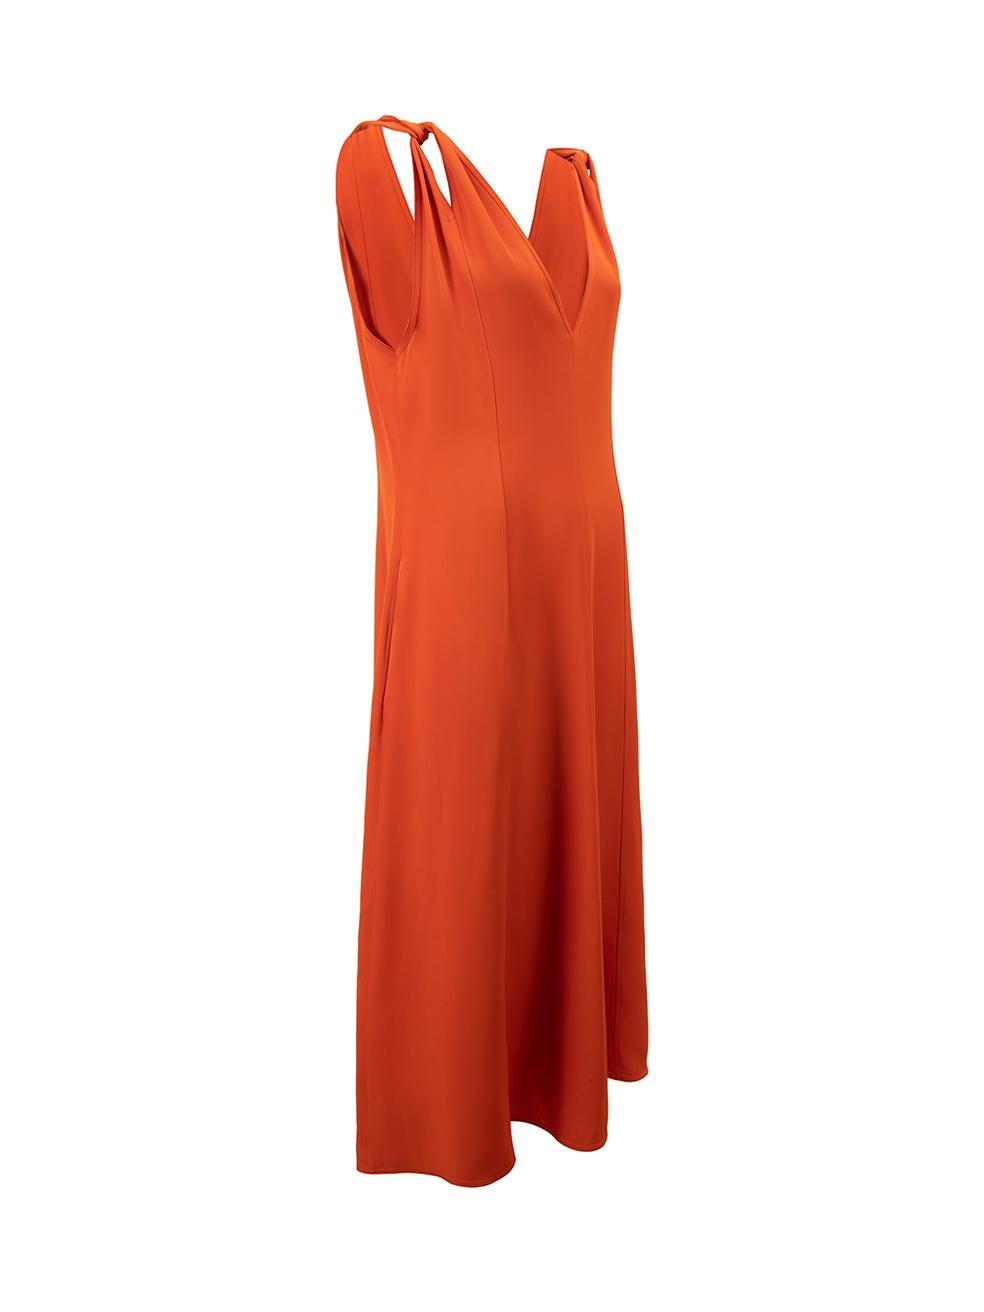 CONDITION is Very good. Minimal wear to dress is evident where a small mark can be seen on this used Victoria Beckham designer resale item.



Details


AW22

Orange

Synthetic

Midi dress

V neckline

Twisted shoulder accent

Front side